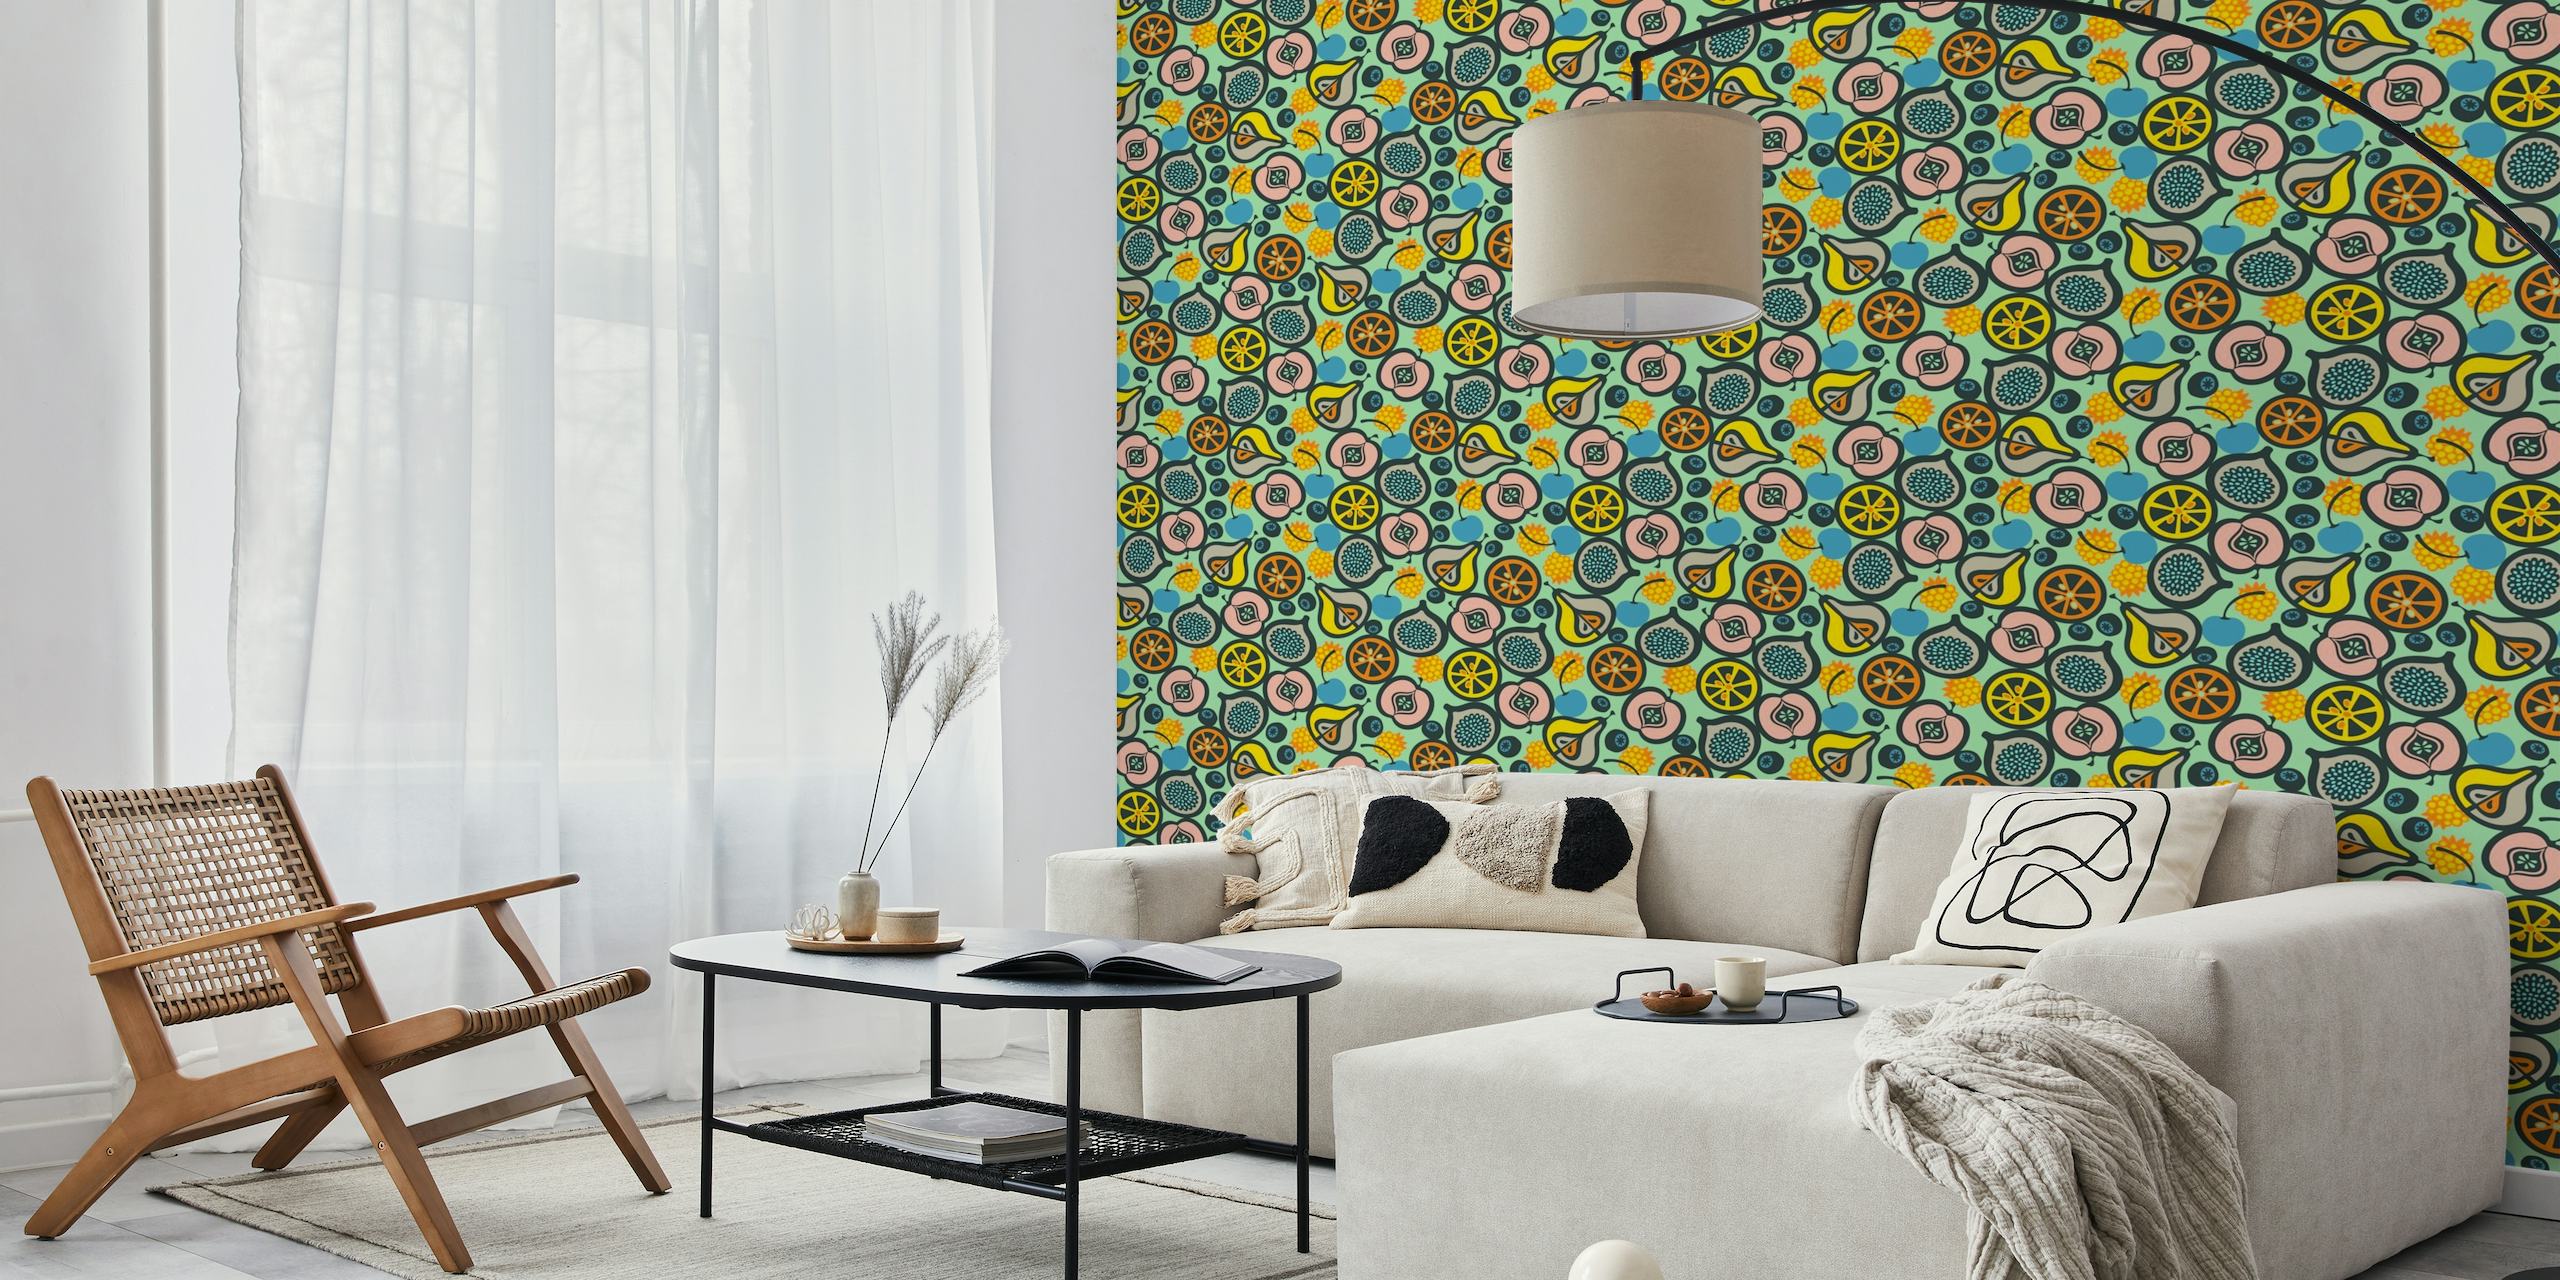 Mid-century modern retro wall mural with a pattern of citrus fruits and berries on a teal background